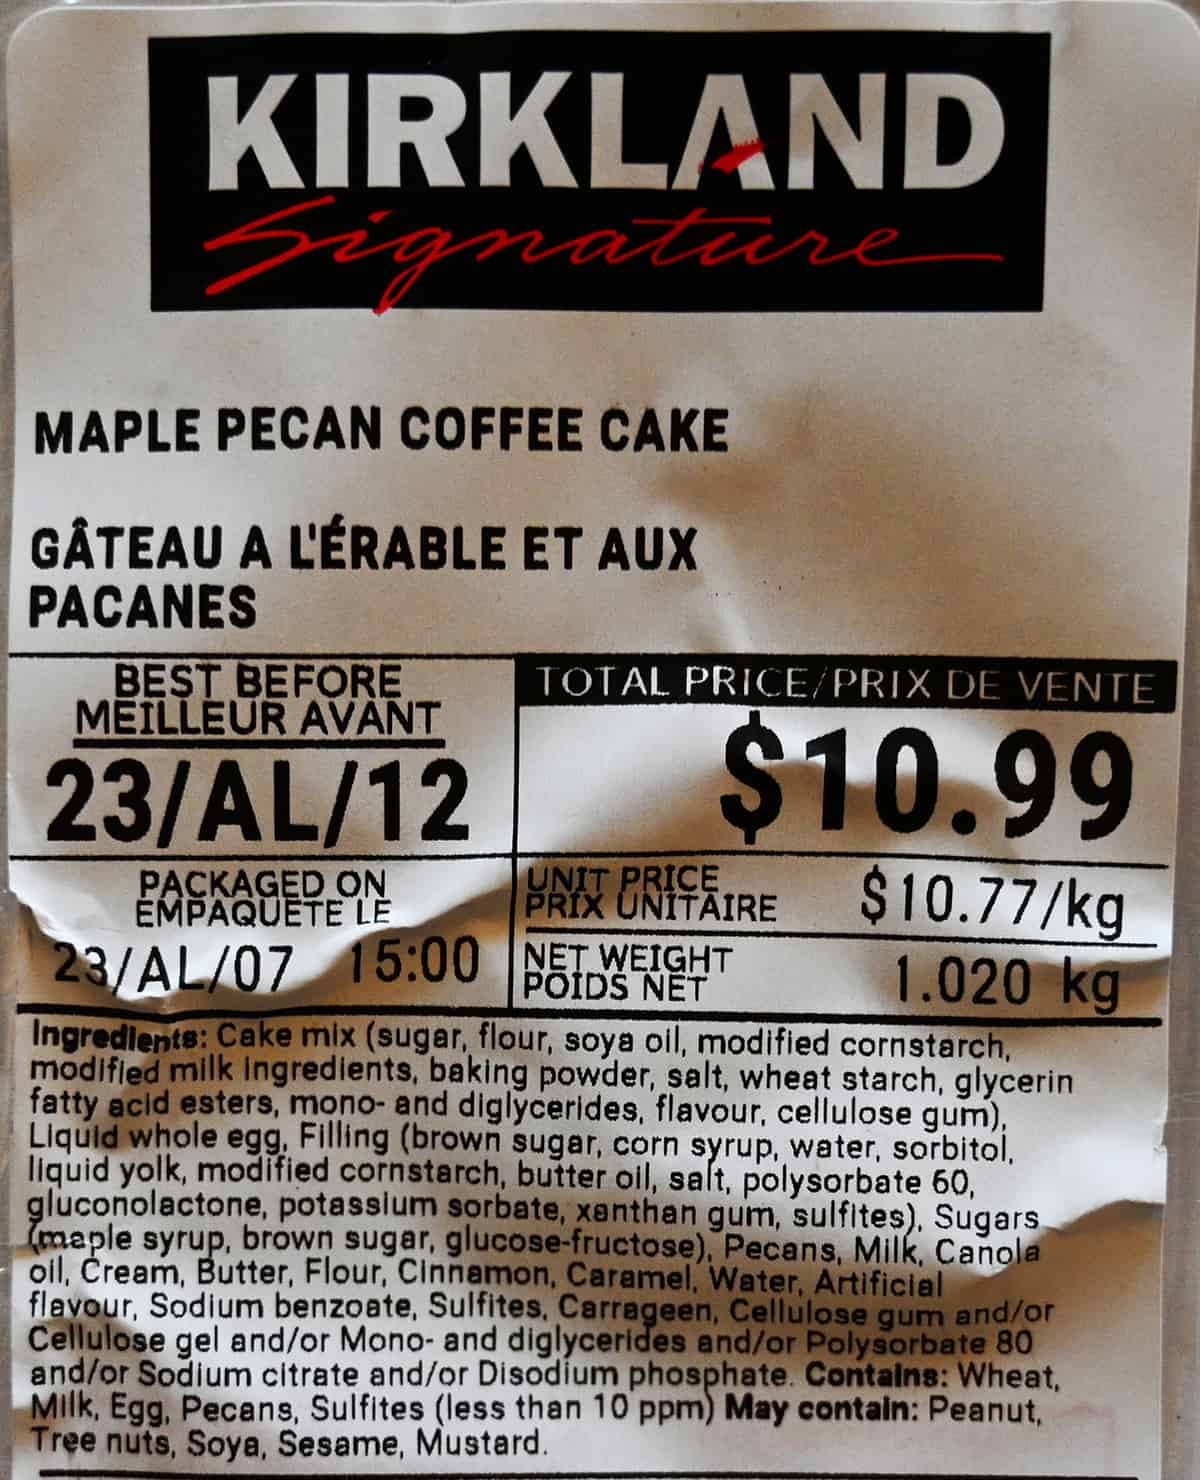 Closeup image of the label on the coffee cake showing the cost and best before date.